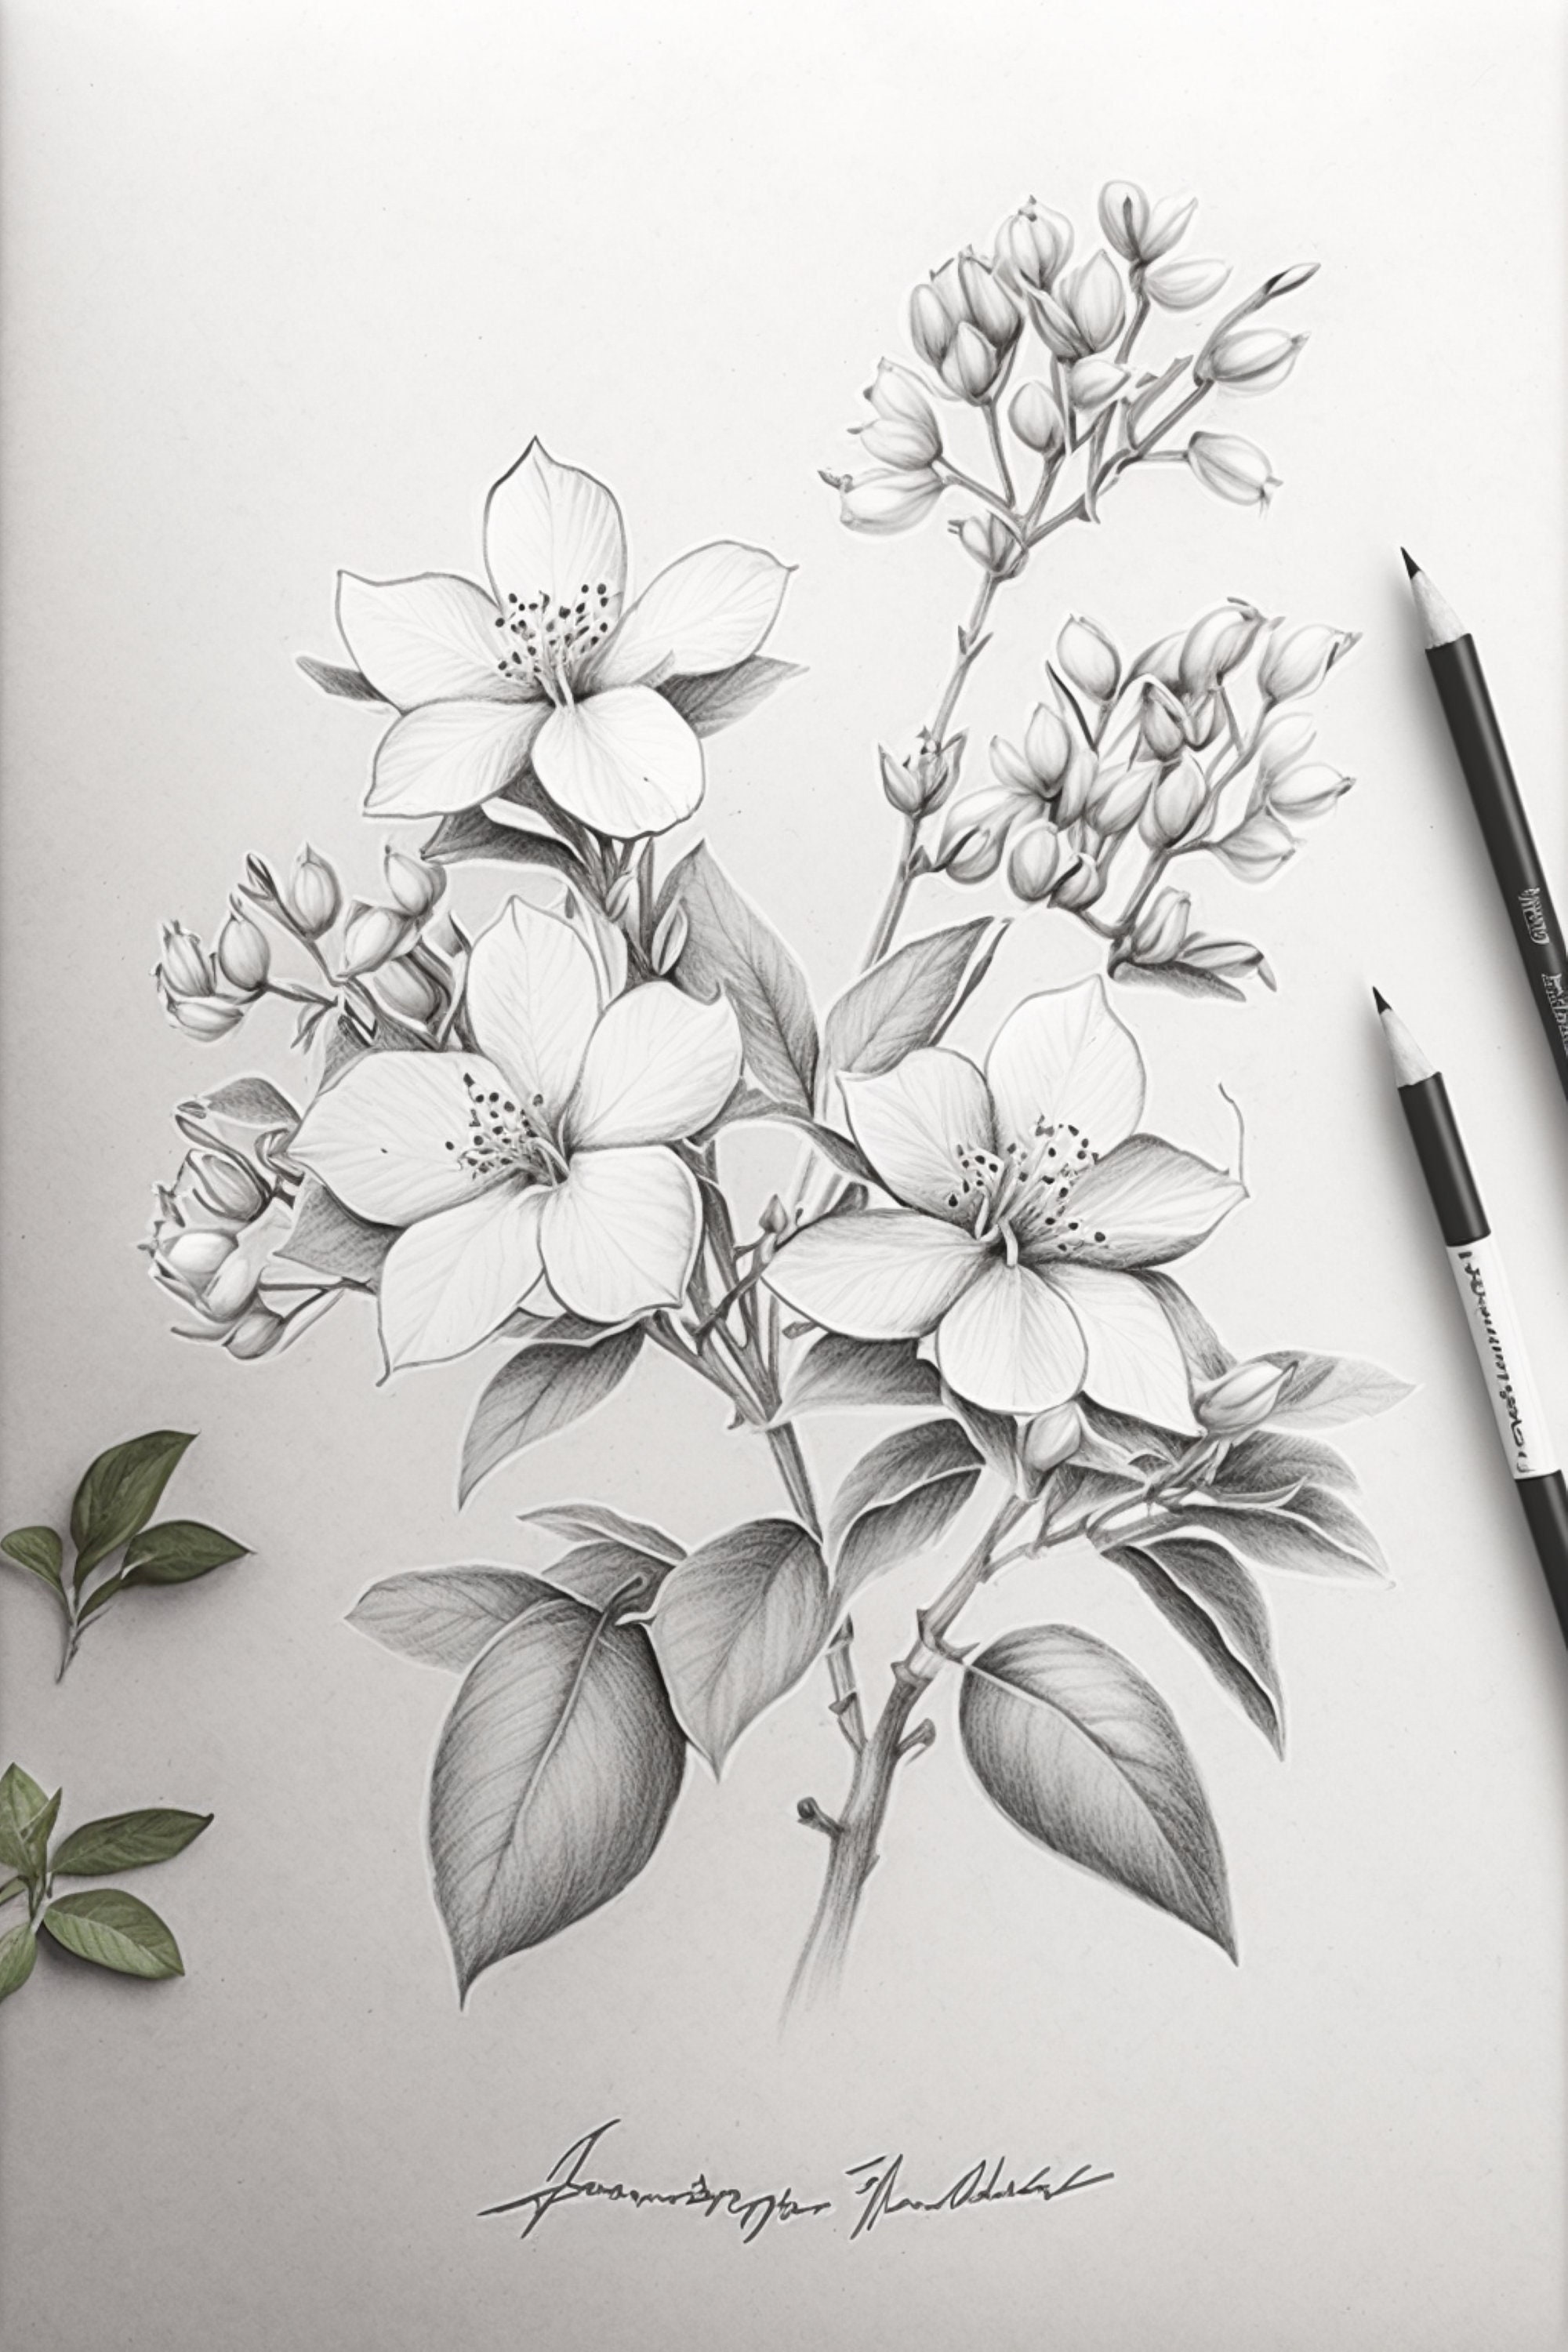 How to make flowers #pencil art drawing #how to drawing - video Dailymotion